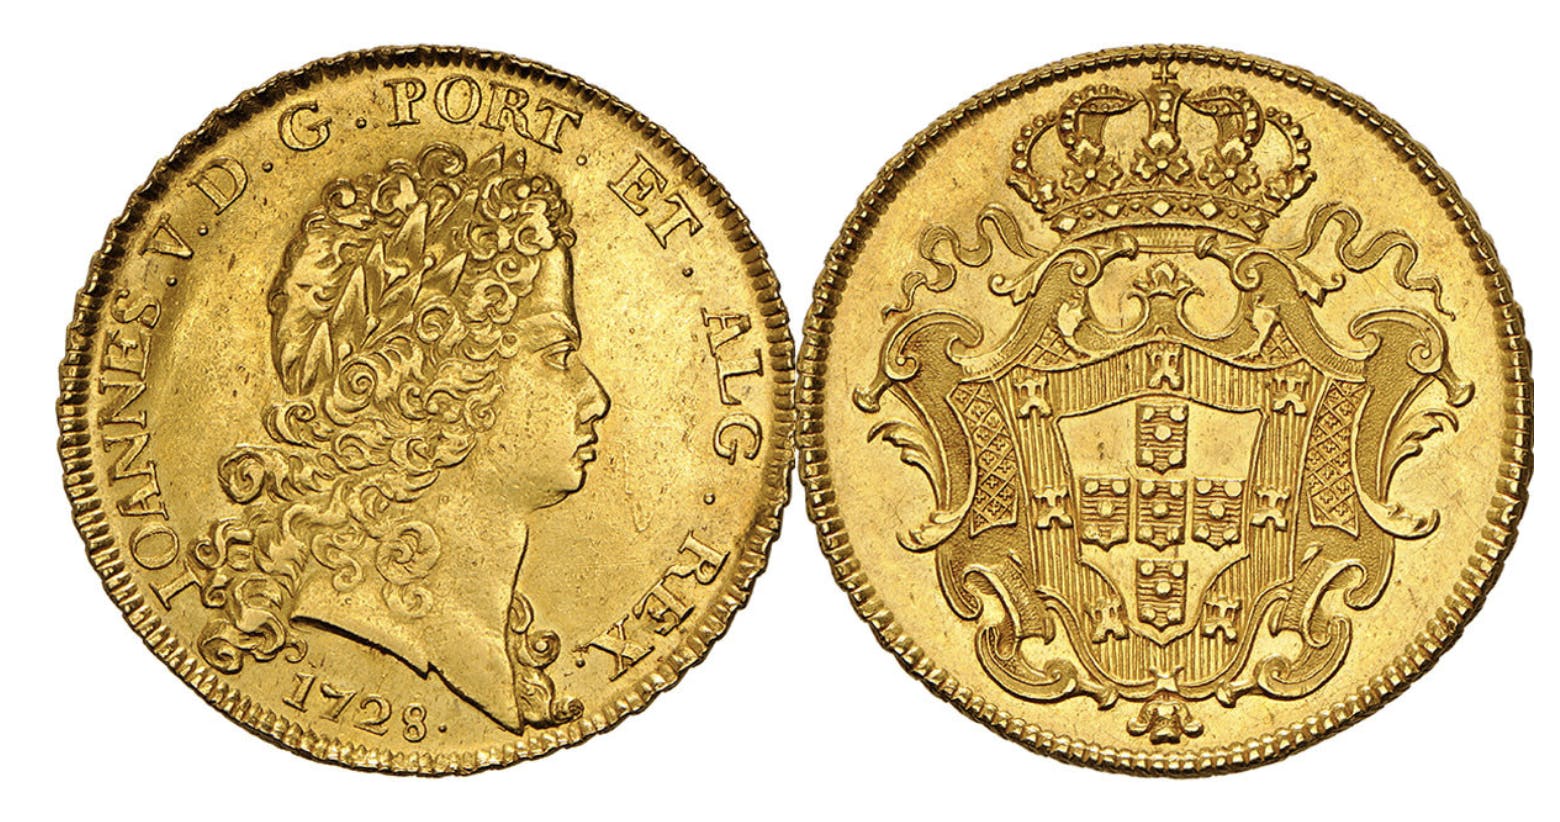 Dobra of D. João V – 24 escudos Gold coin from Portugal, 1731.  Diameter: 53 mm, Weight: 84.41 g, Metal: Gold   Dobra 1 © Heritage Auctions